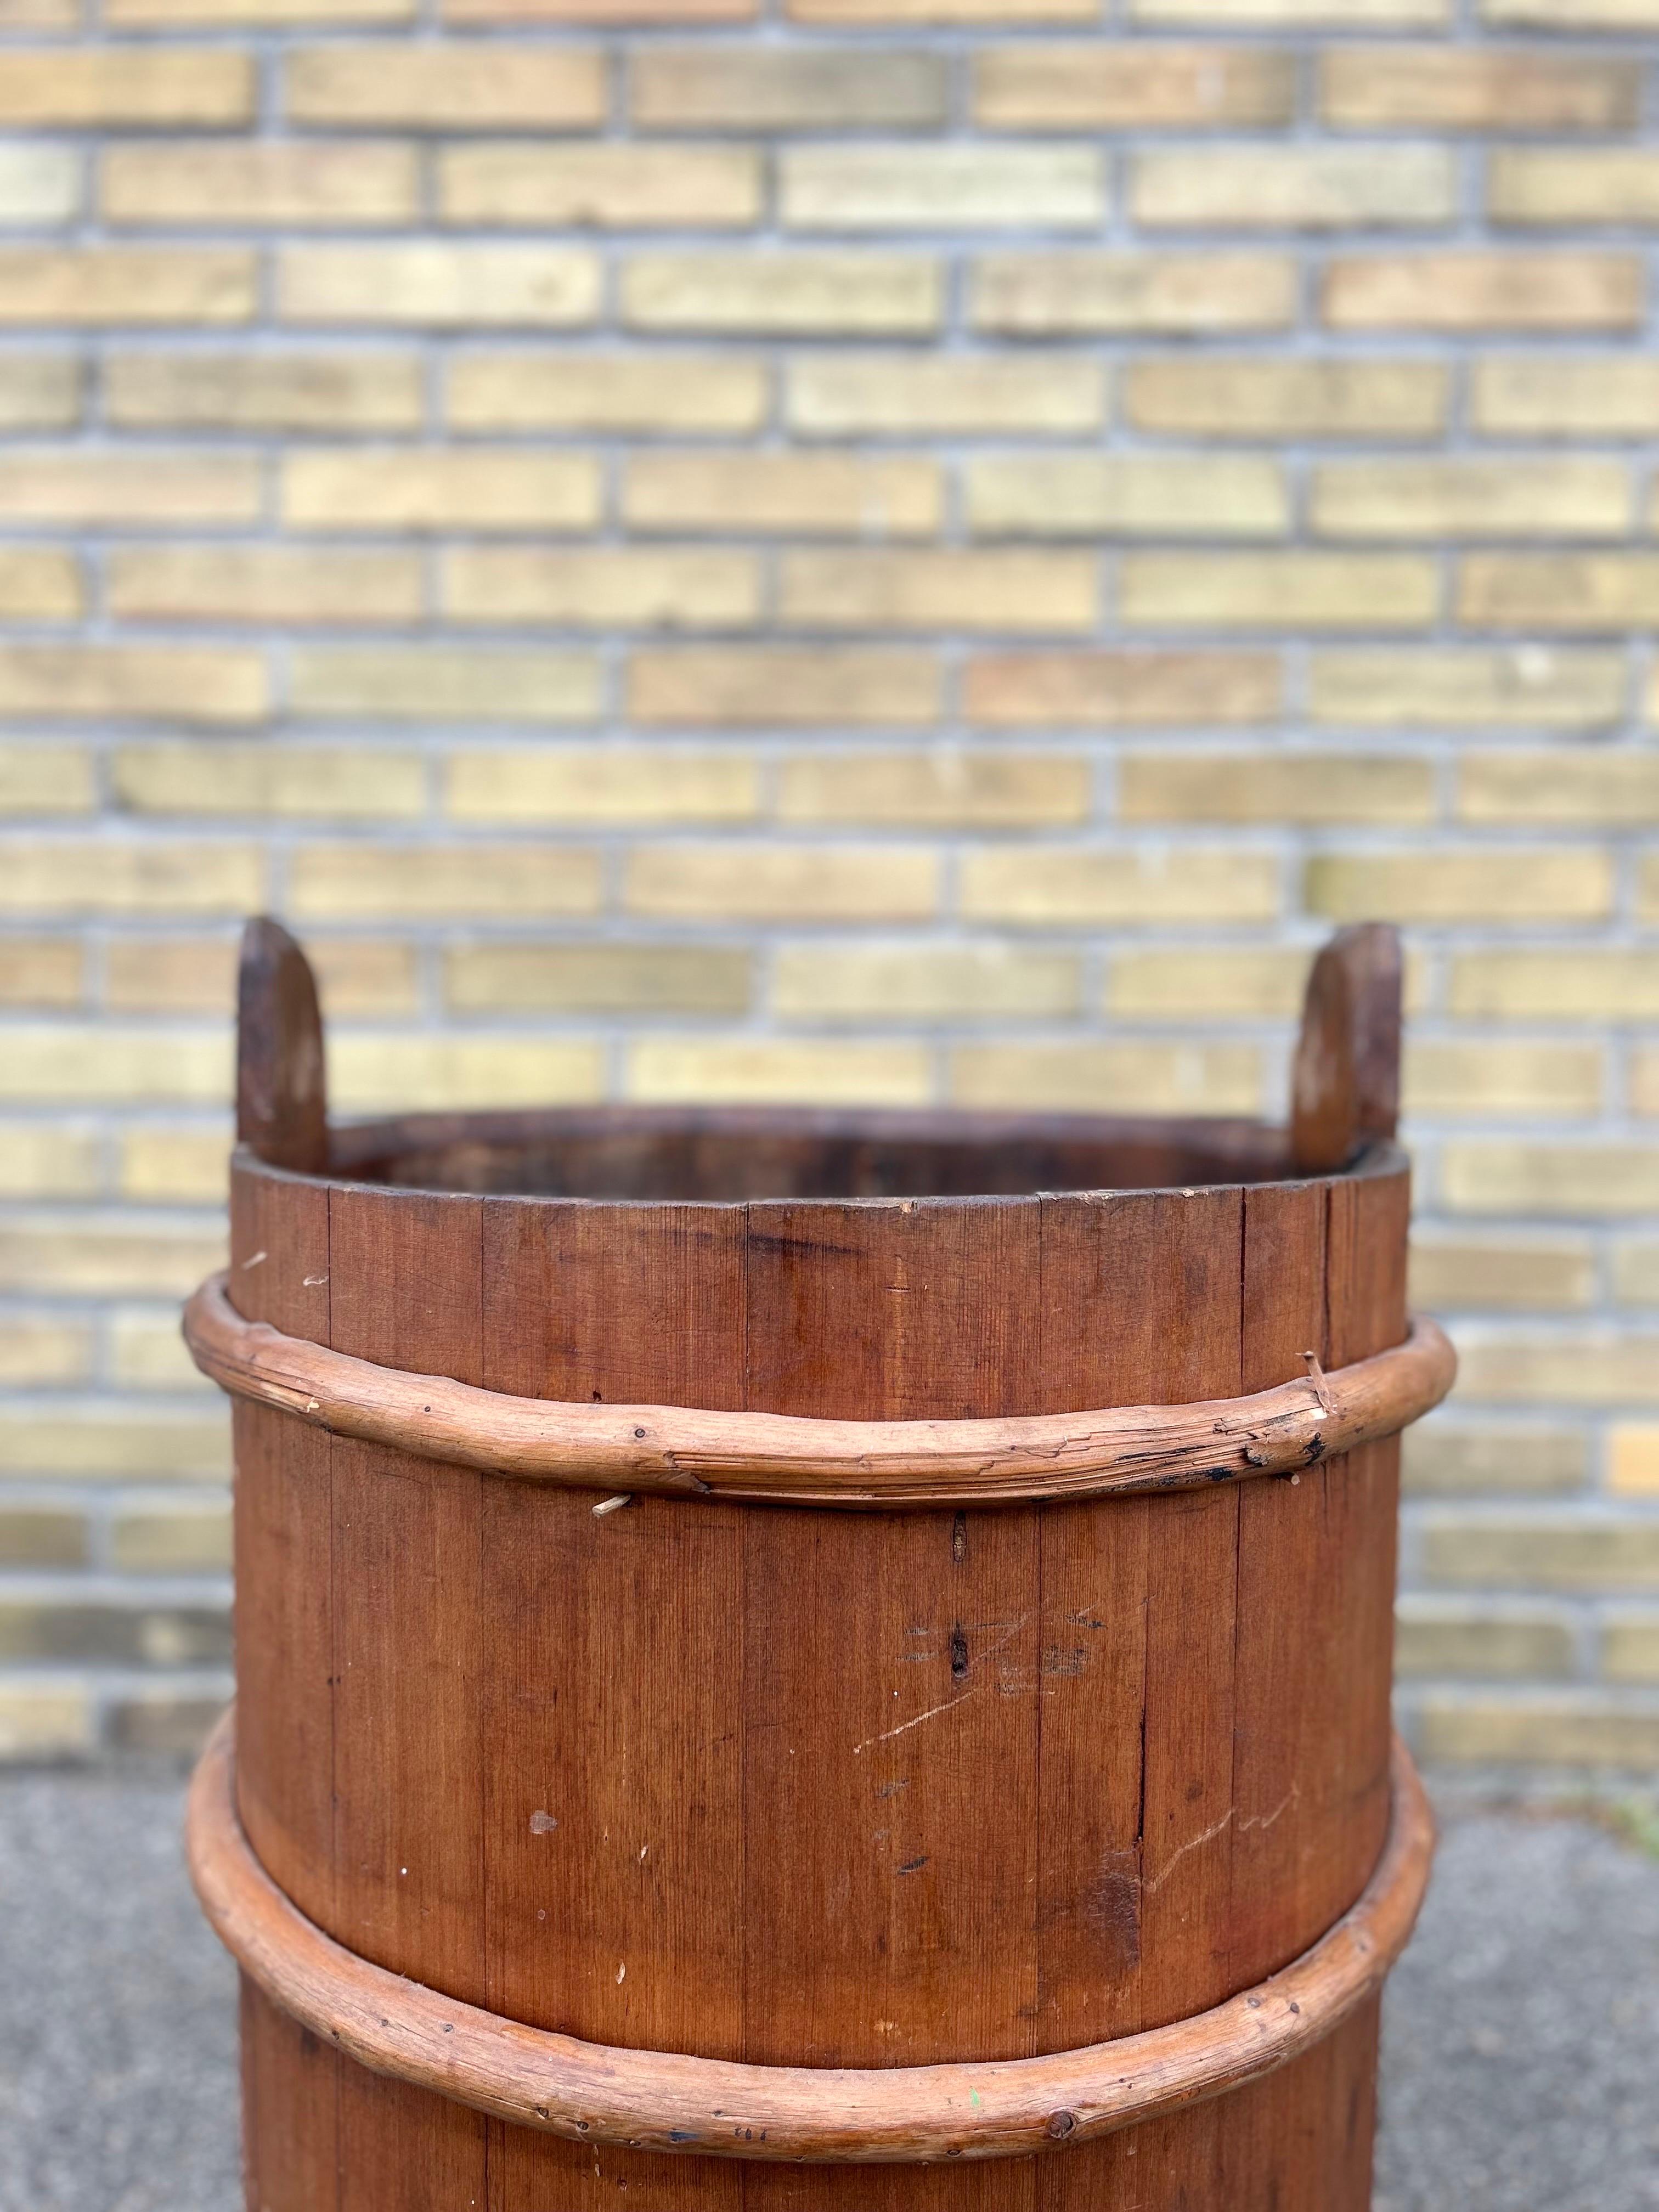 Decorative Swedish Wooden Folk Art Planter 1800’s In Good Condition For Sale In Valby, 84